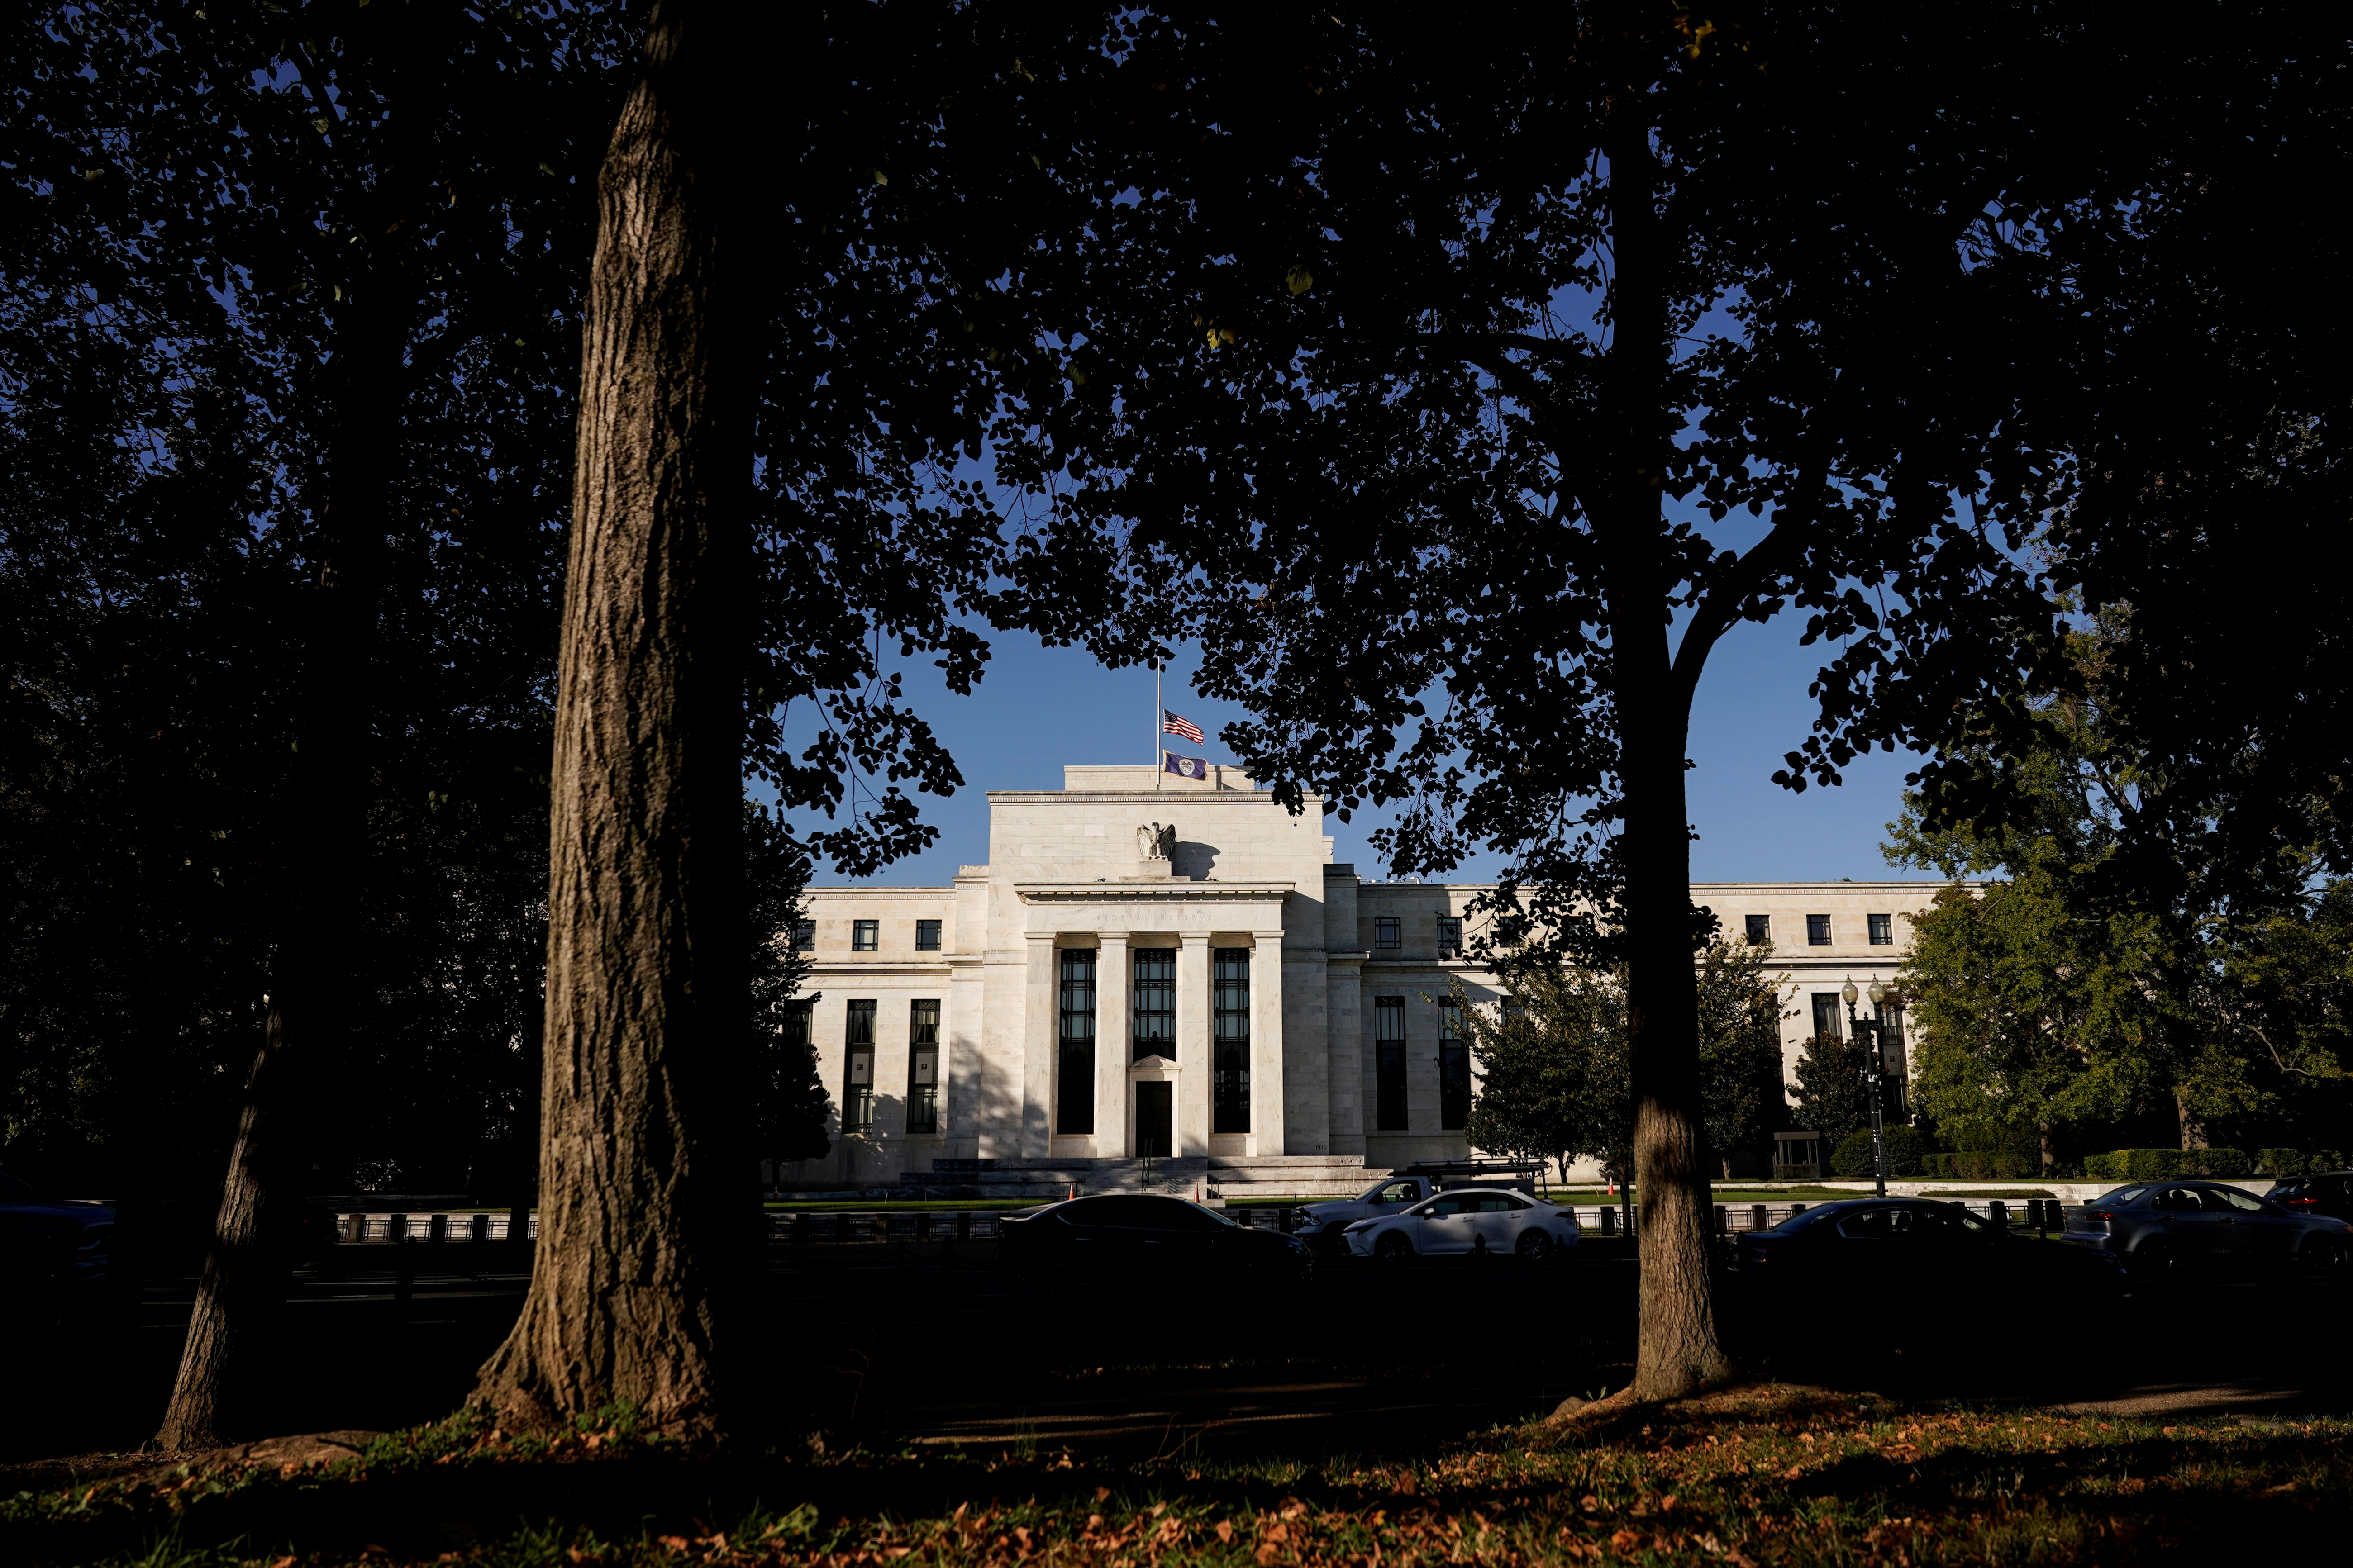 The Federal Reserve building is seen in Washington, U.S., October 20, 2021. REUTERS/Joshua Roberts